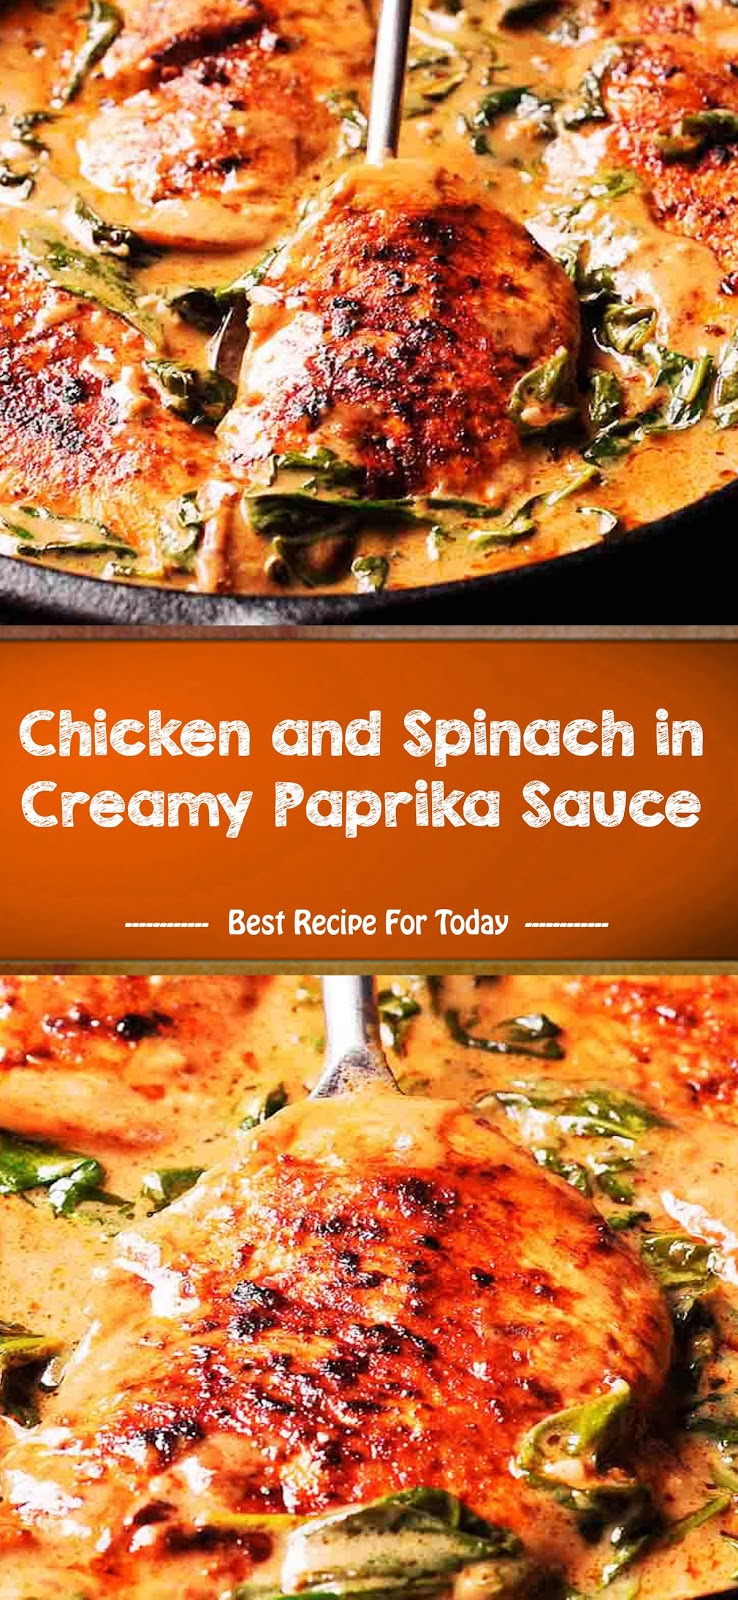 Chicken and Spinach in Creamy Paprika Sauce - Jolly Lotus